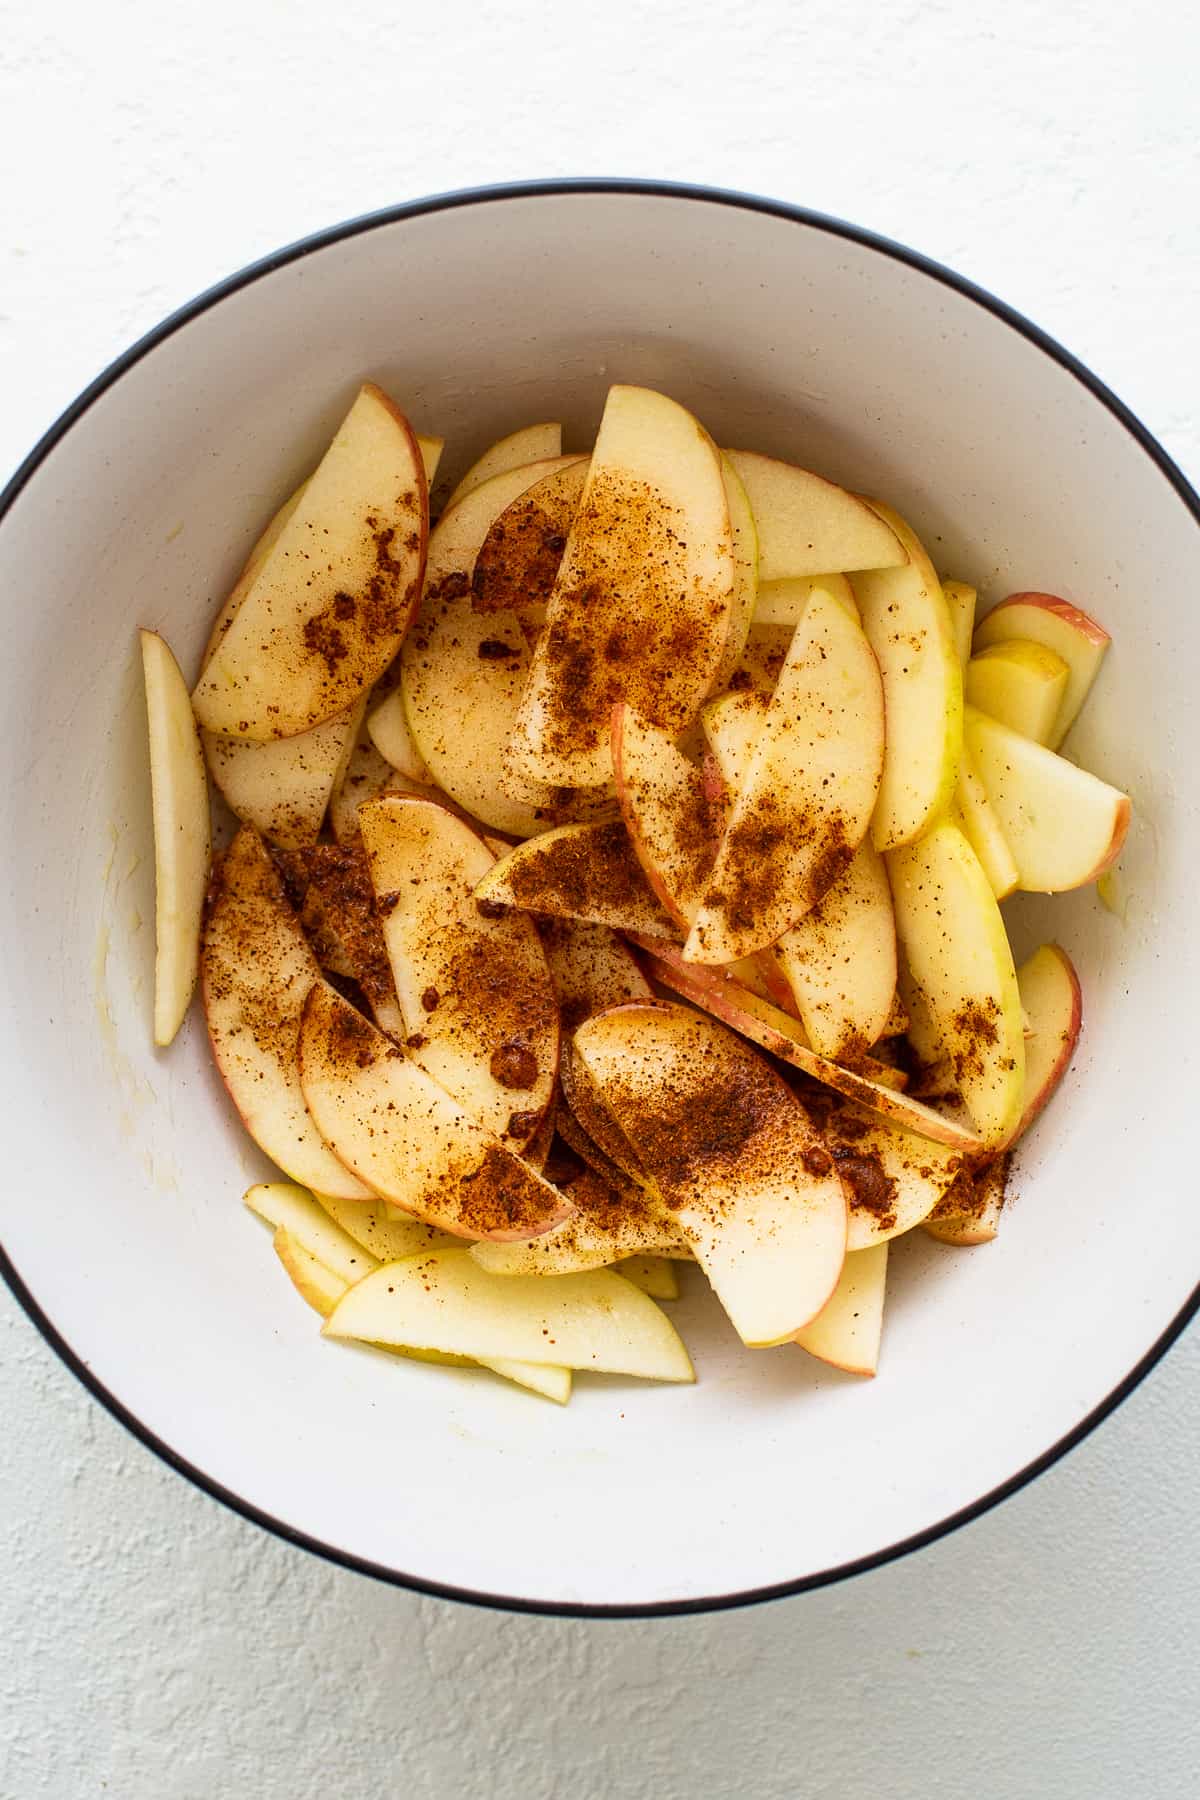 Apples and spices in a bowl.